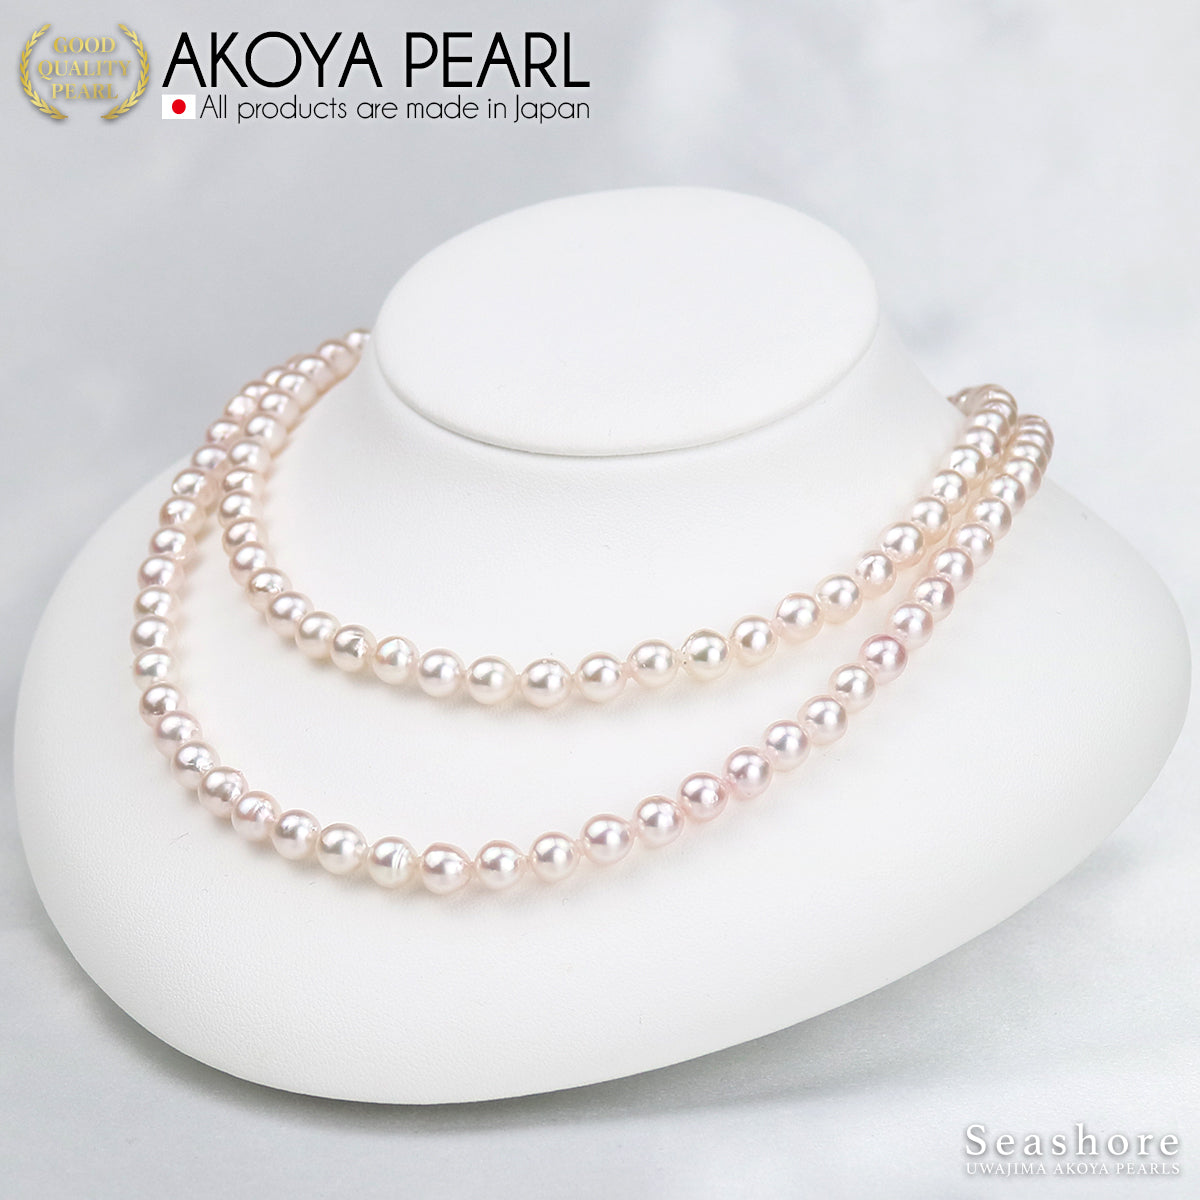 Akoya Pearl Long Pearl Necklace 80cm 85cm Semi-Baroque [6.5-7.0mm] White Certificate of Authenticity Cardboard Case Included (4090)